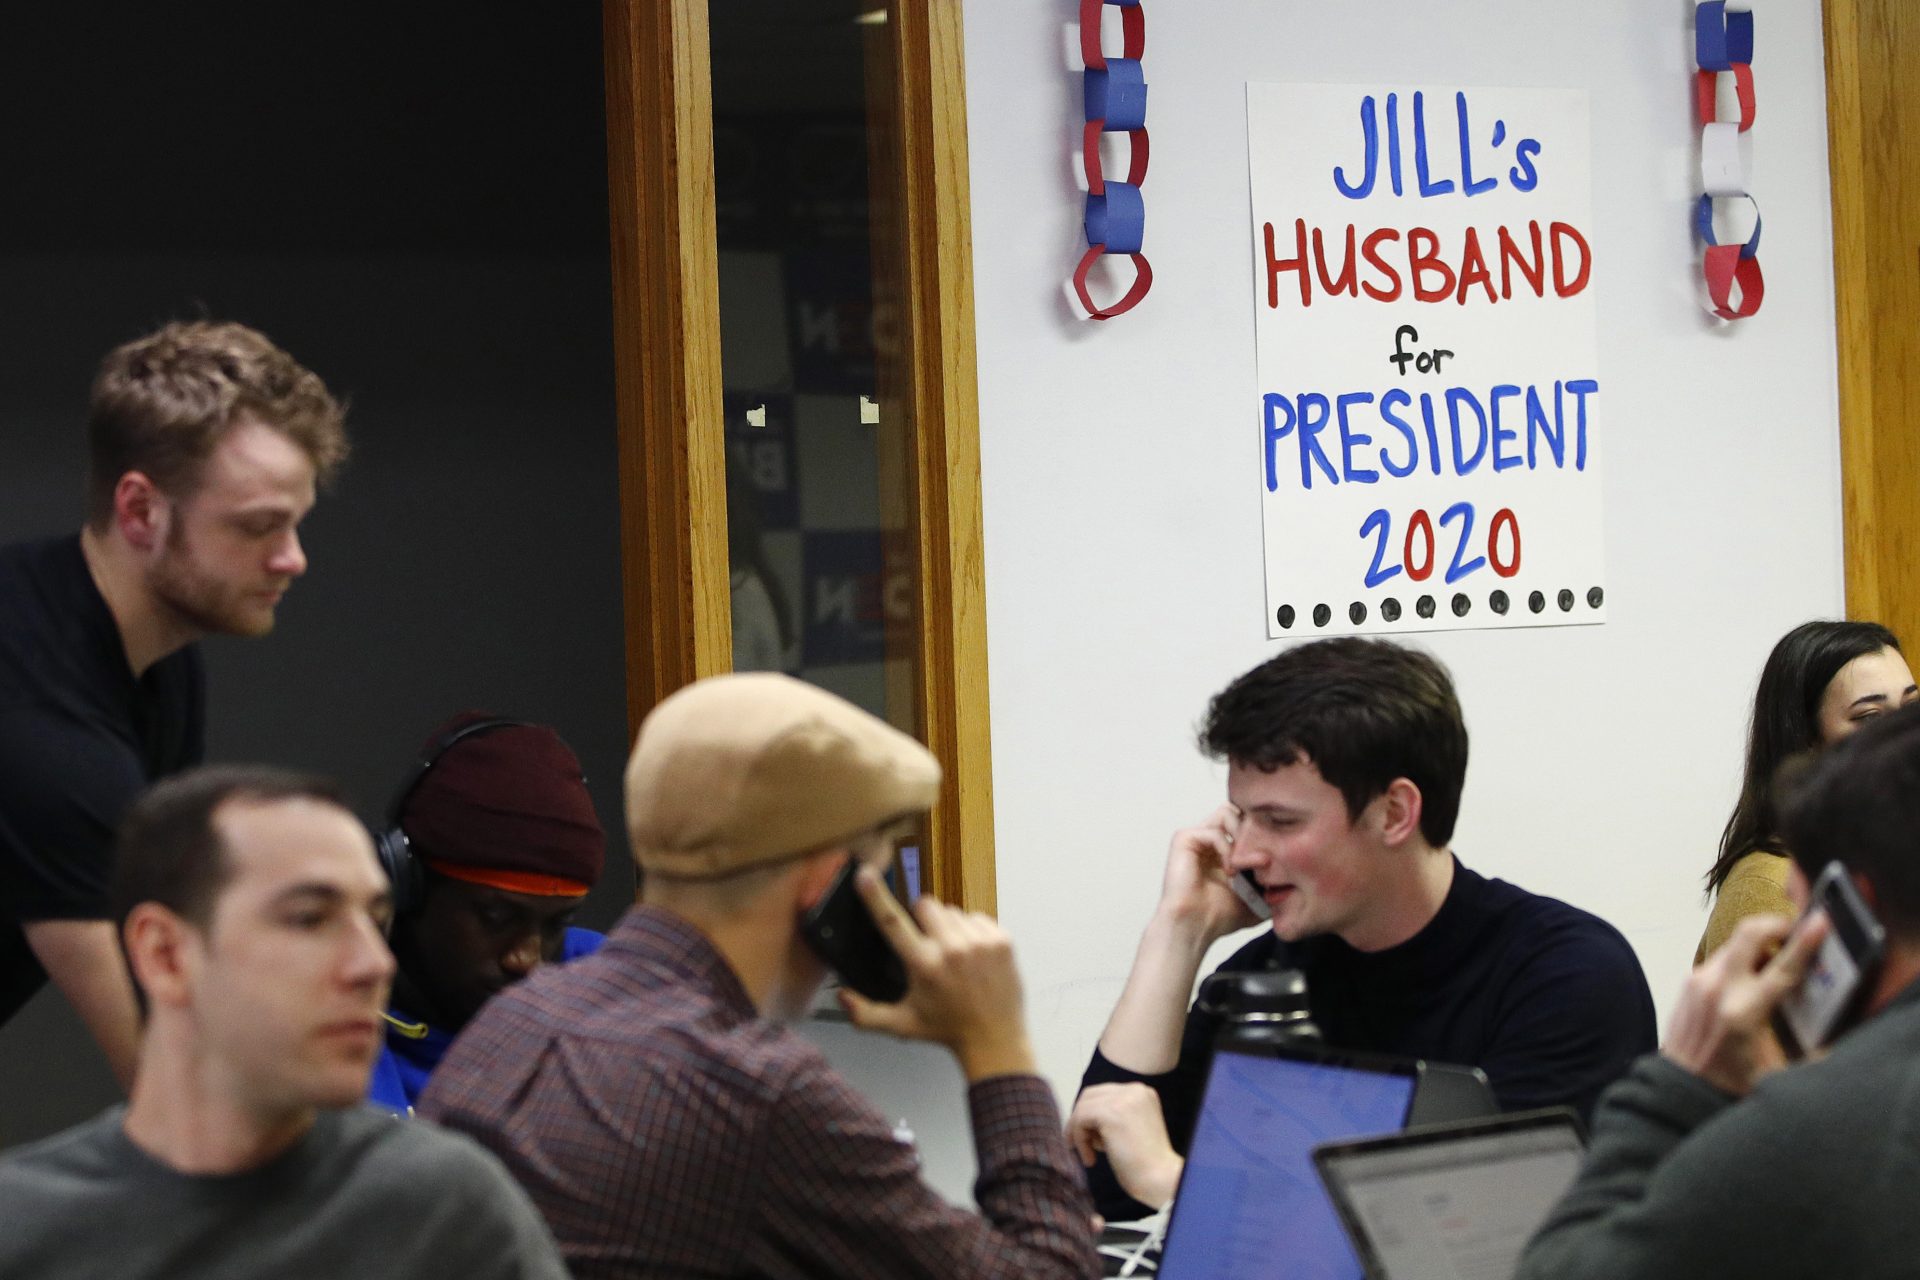 A poster for Democratic presidential candidate former Vice President Joe Biden hangs behind volunteers as they call potential caucus-goers from a campaign field office, Monday, Jan. 13, 2020, in Des Moines, Iowa.